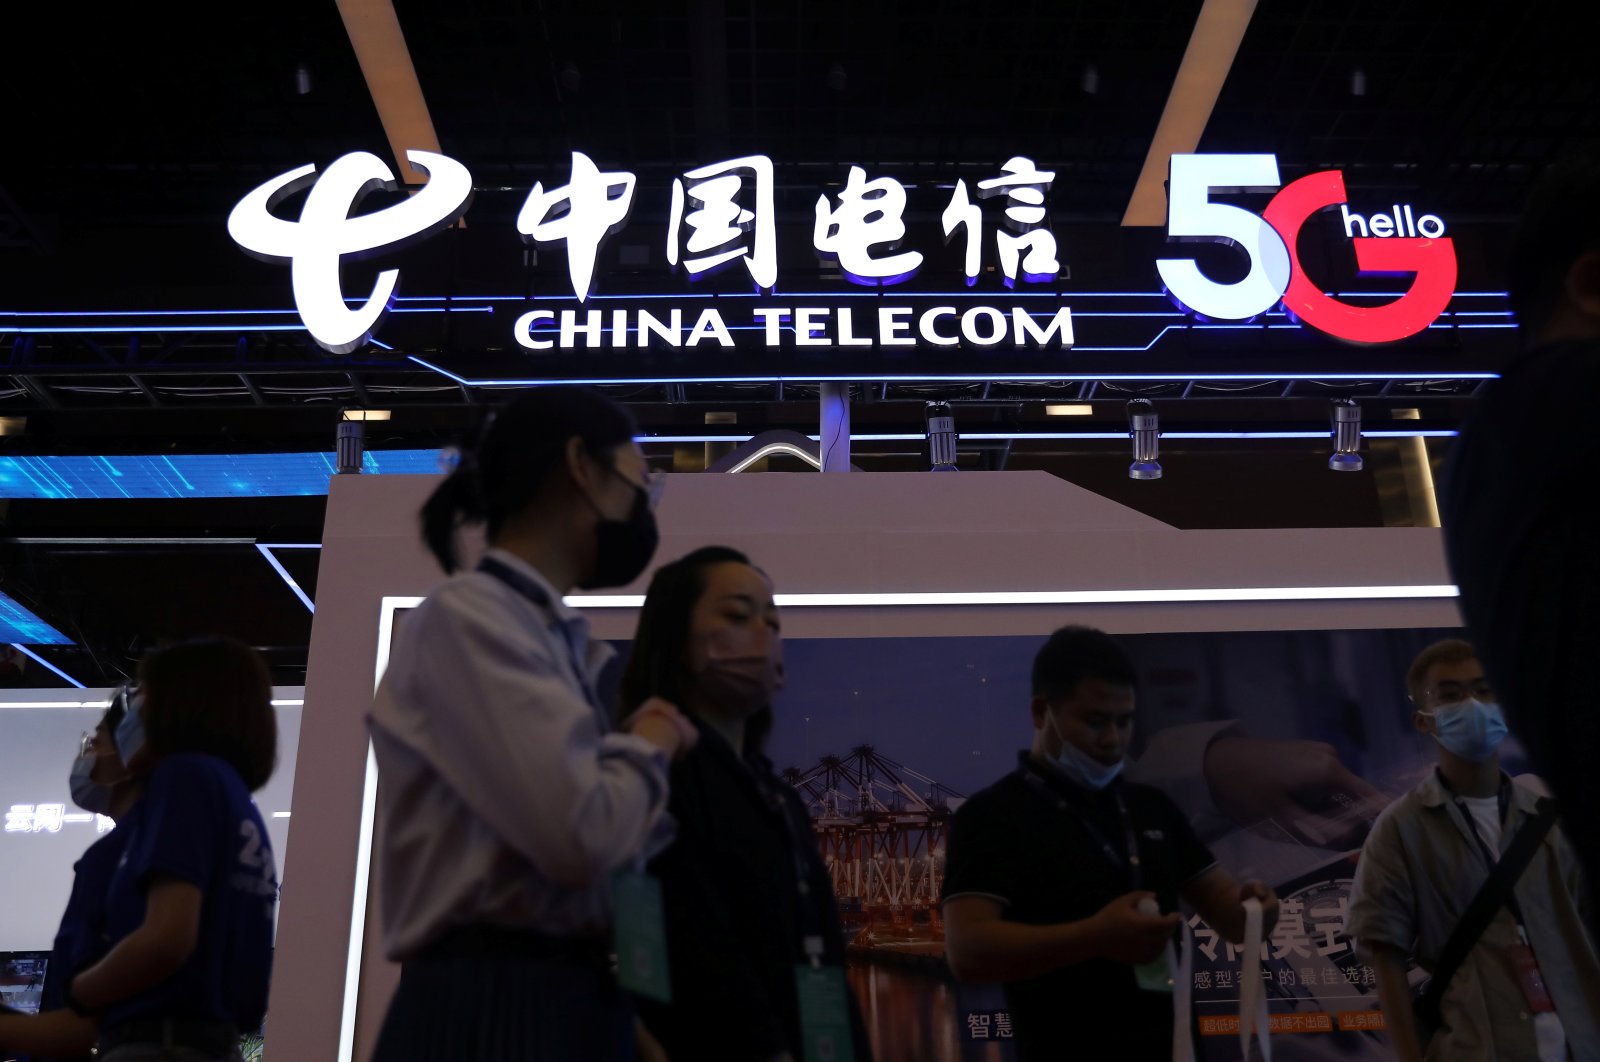 People are seen at a China Telecom booth at an exhibition during China Internet Conference in Beijing, China, July 13, 2021. (Reuters Photo)